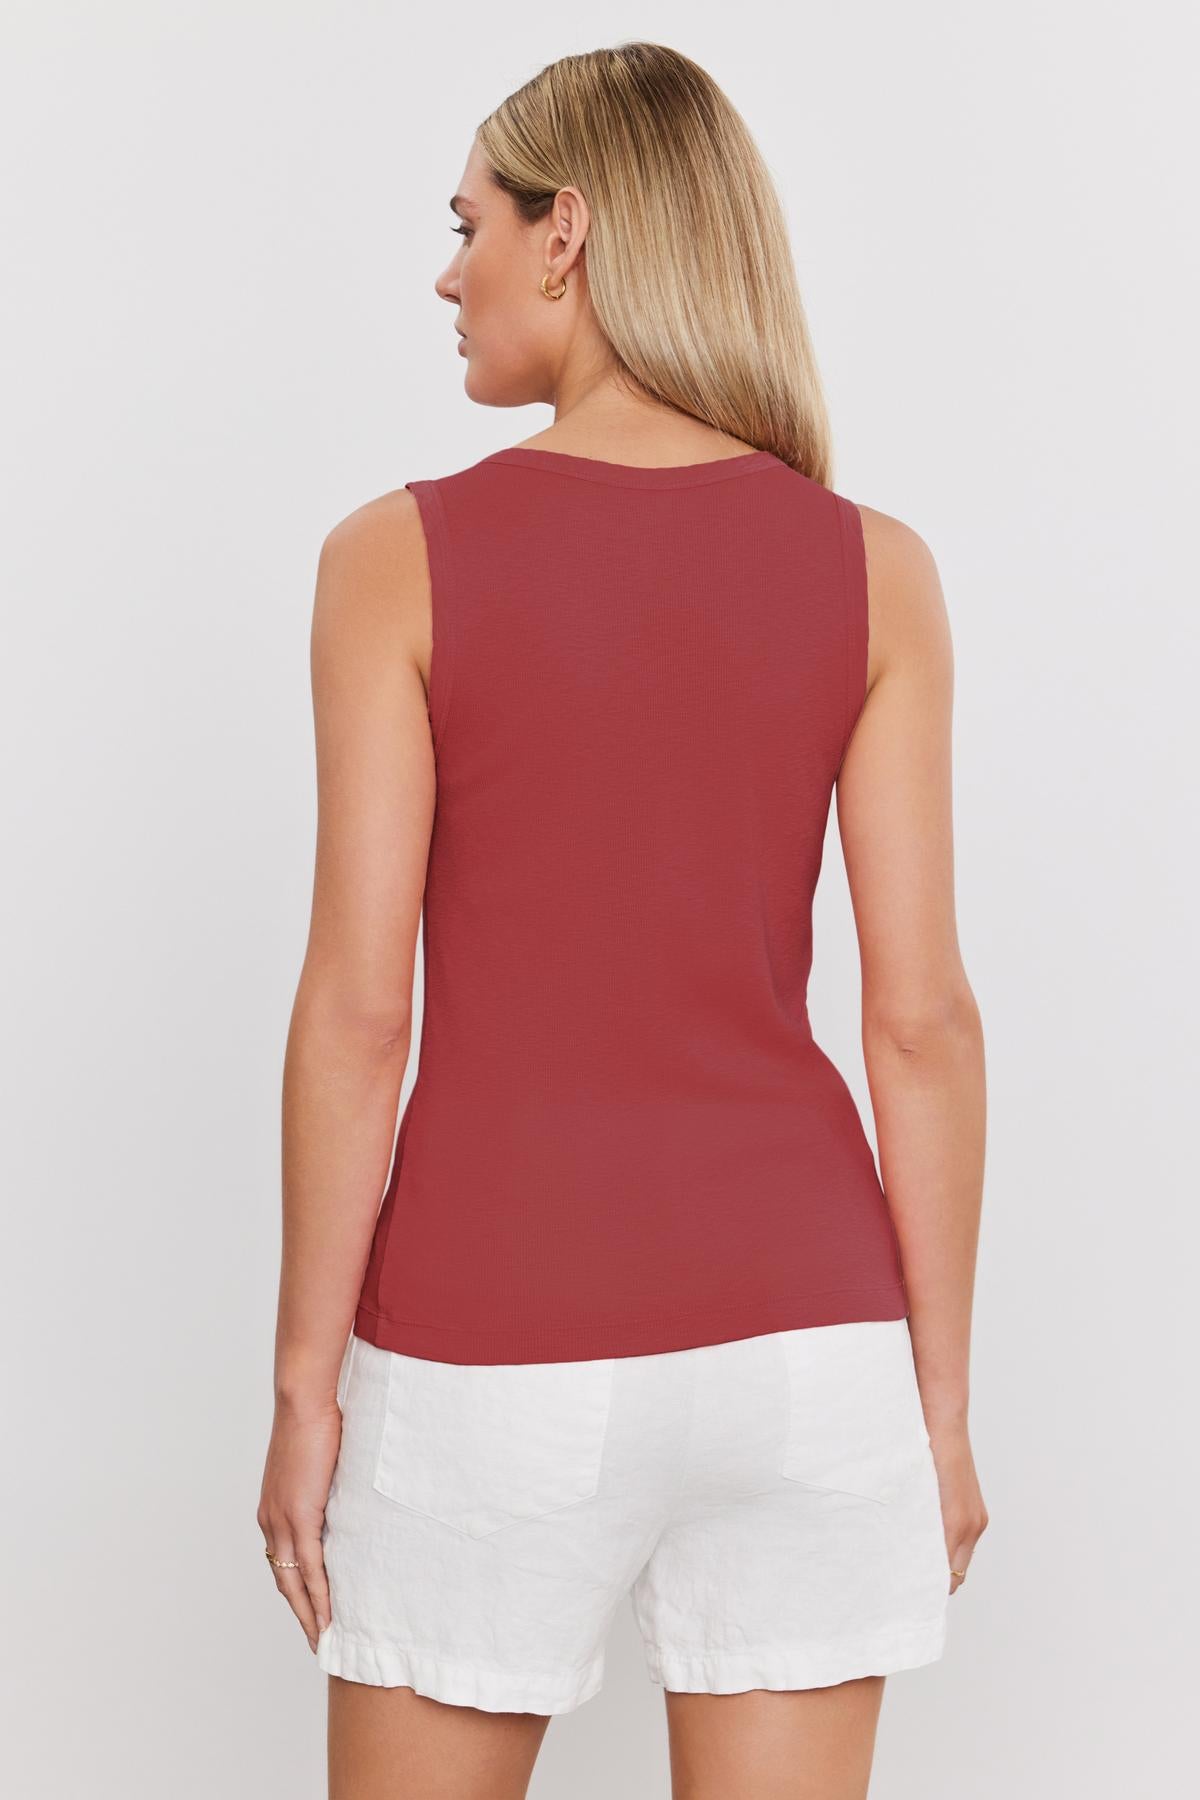 A woman with long blonde hair is seen from the back, wearing a sleeveless red MAXIE RIBBED TANK TOP by Velvet by Graham & Spencer and white shorts.-37241154601153